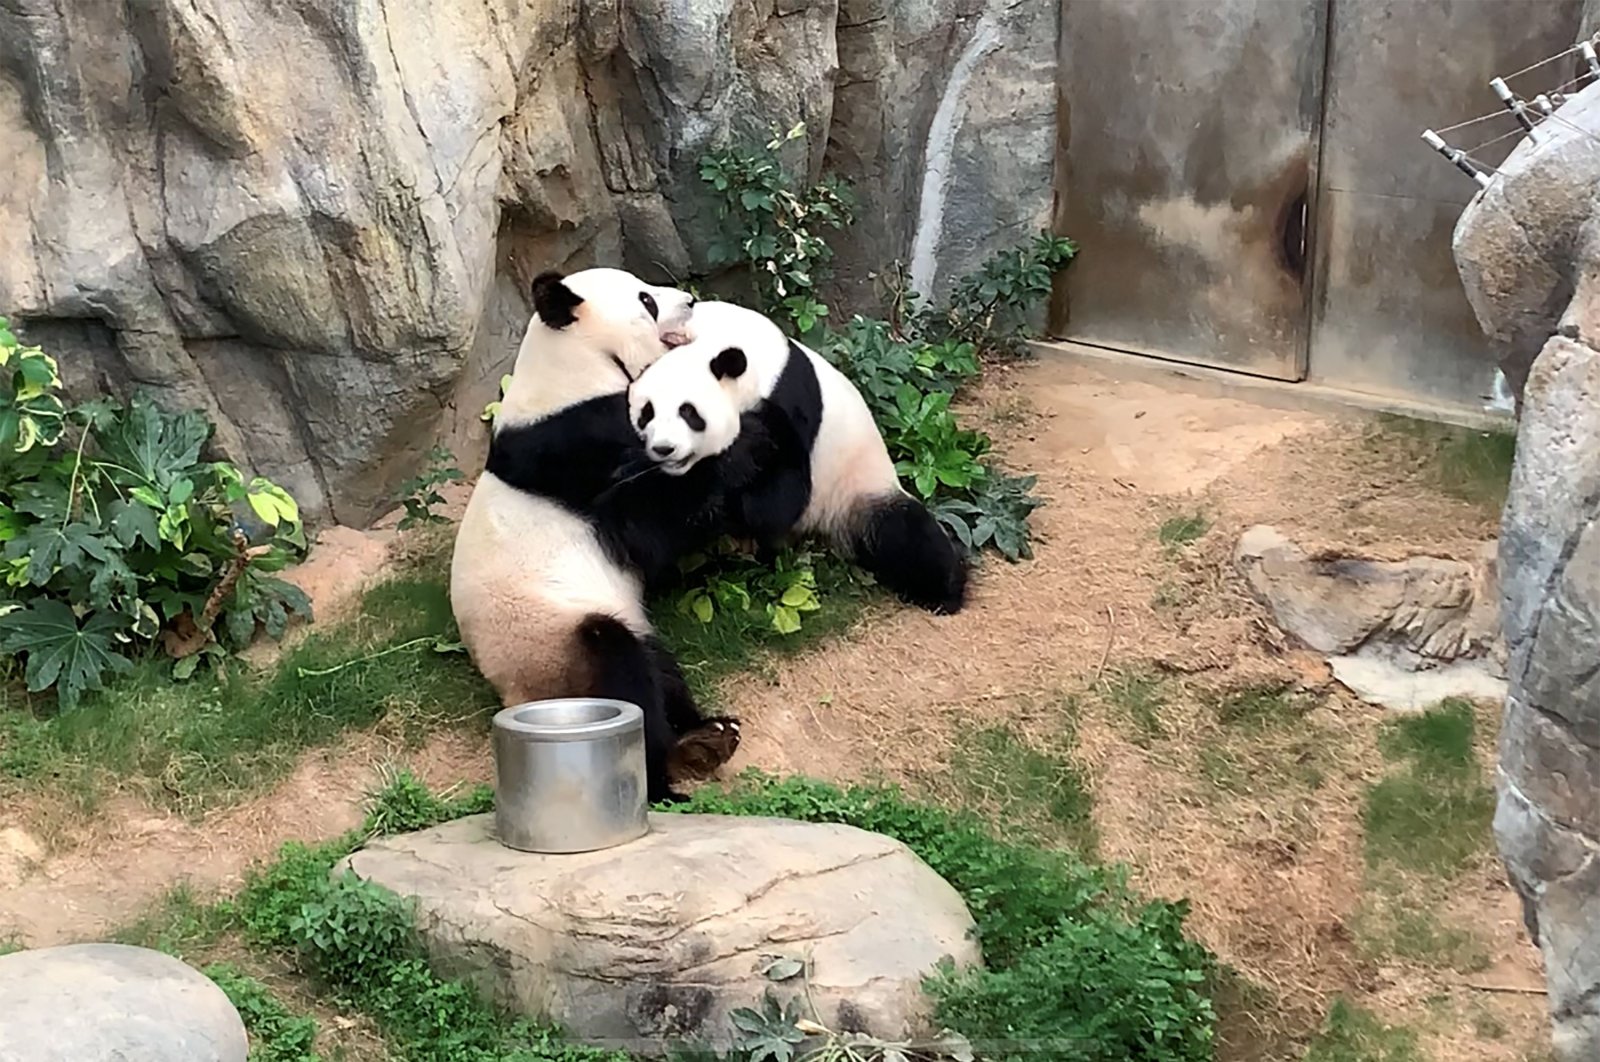 This handout photo provided by Ocean Park Hong Kong shows giant pandas Ying Ying and Le Le before mating at Ocean Park in Hong Kong on Monday, April 6, 2020. (AFP Photo)